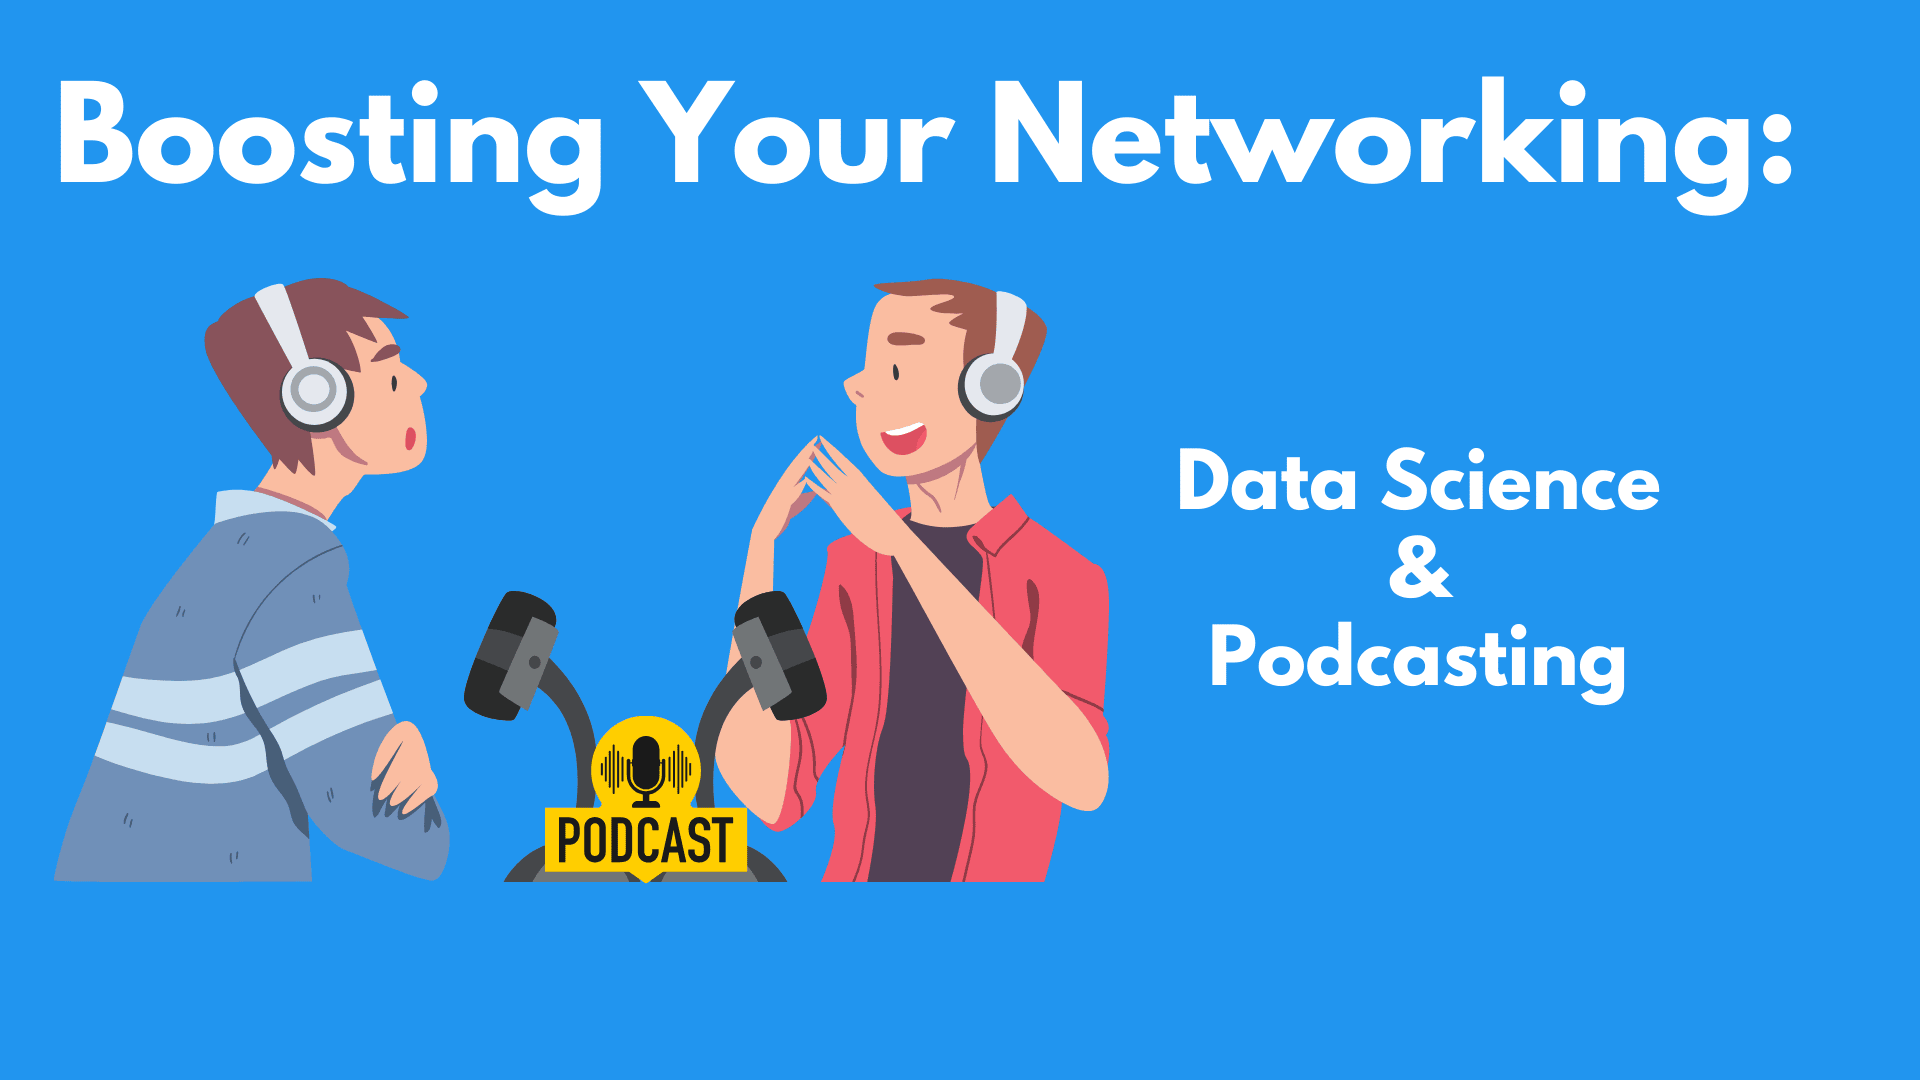 Data Science & Podcasting to the Rescue